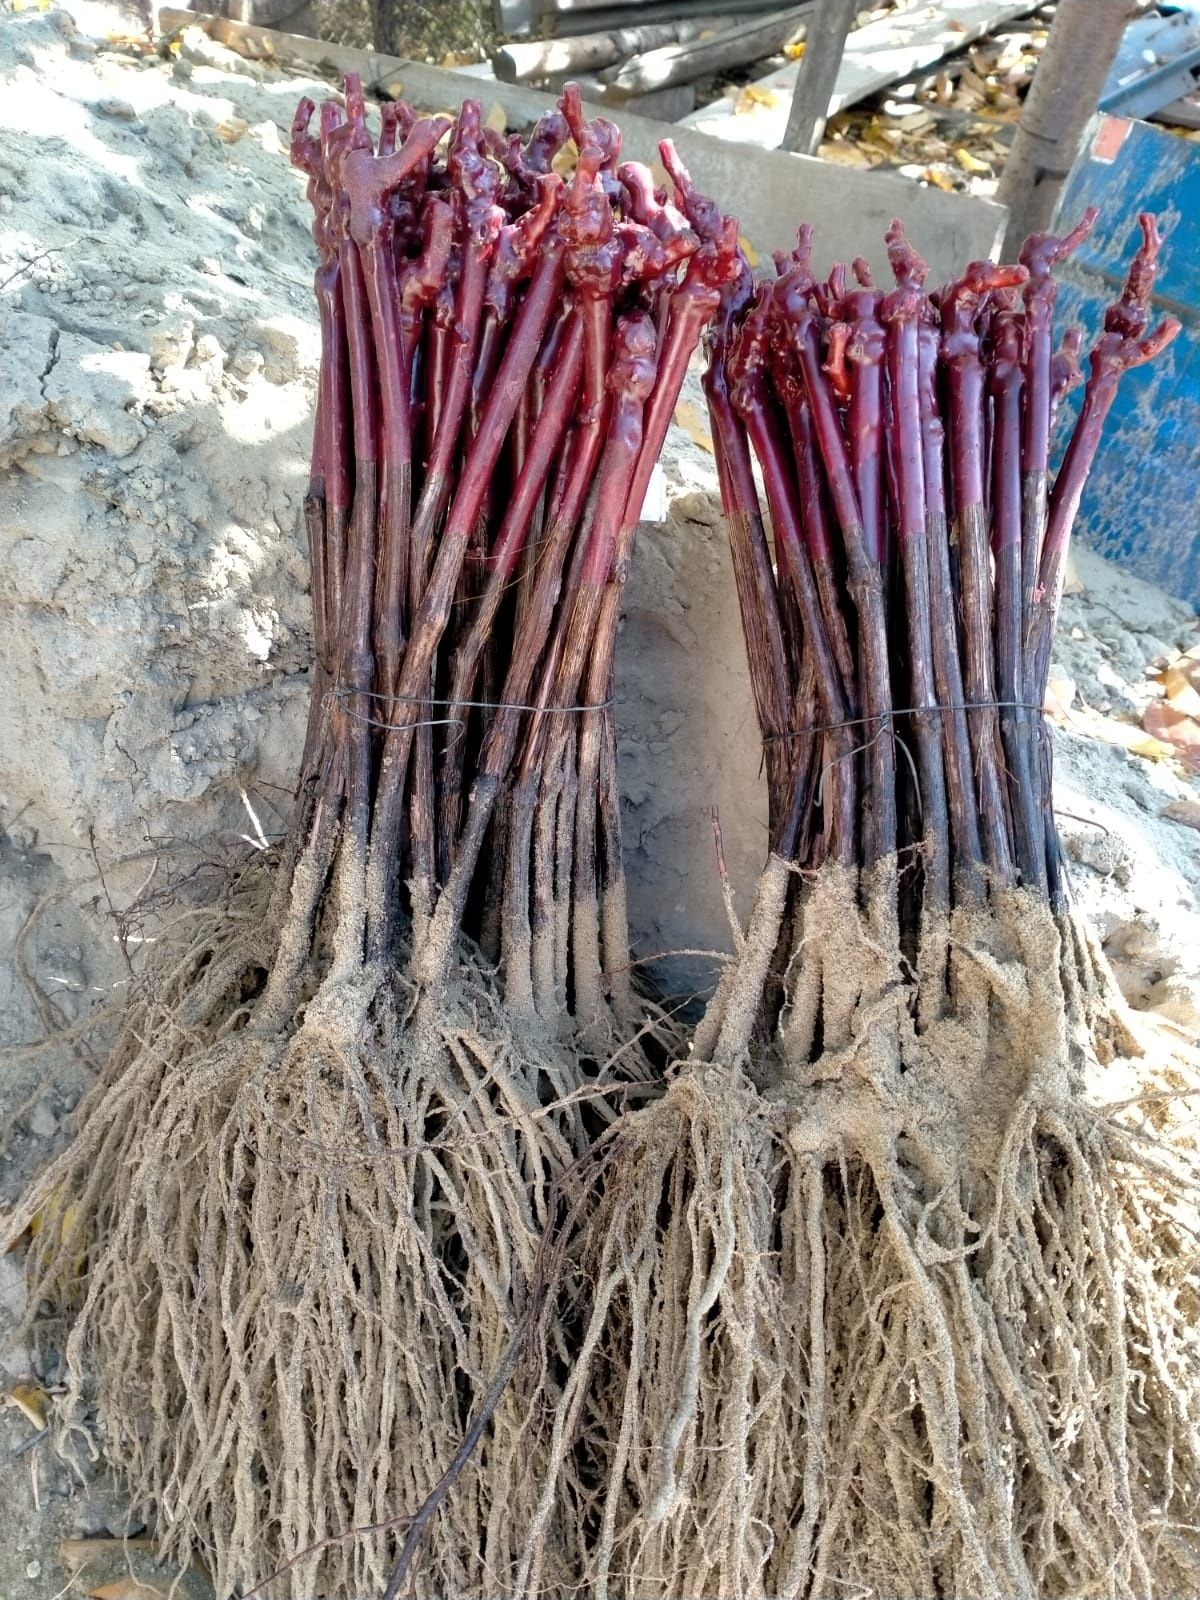 Red Rhubarb Roots